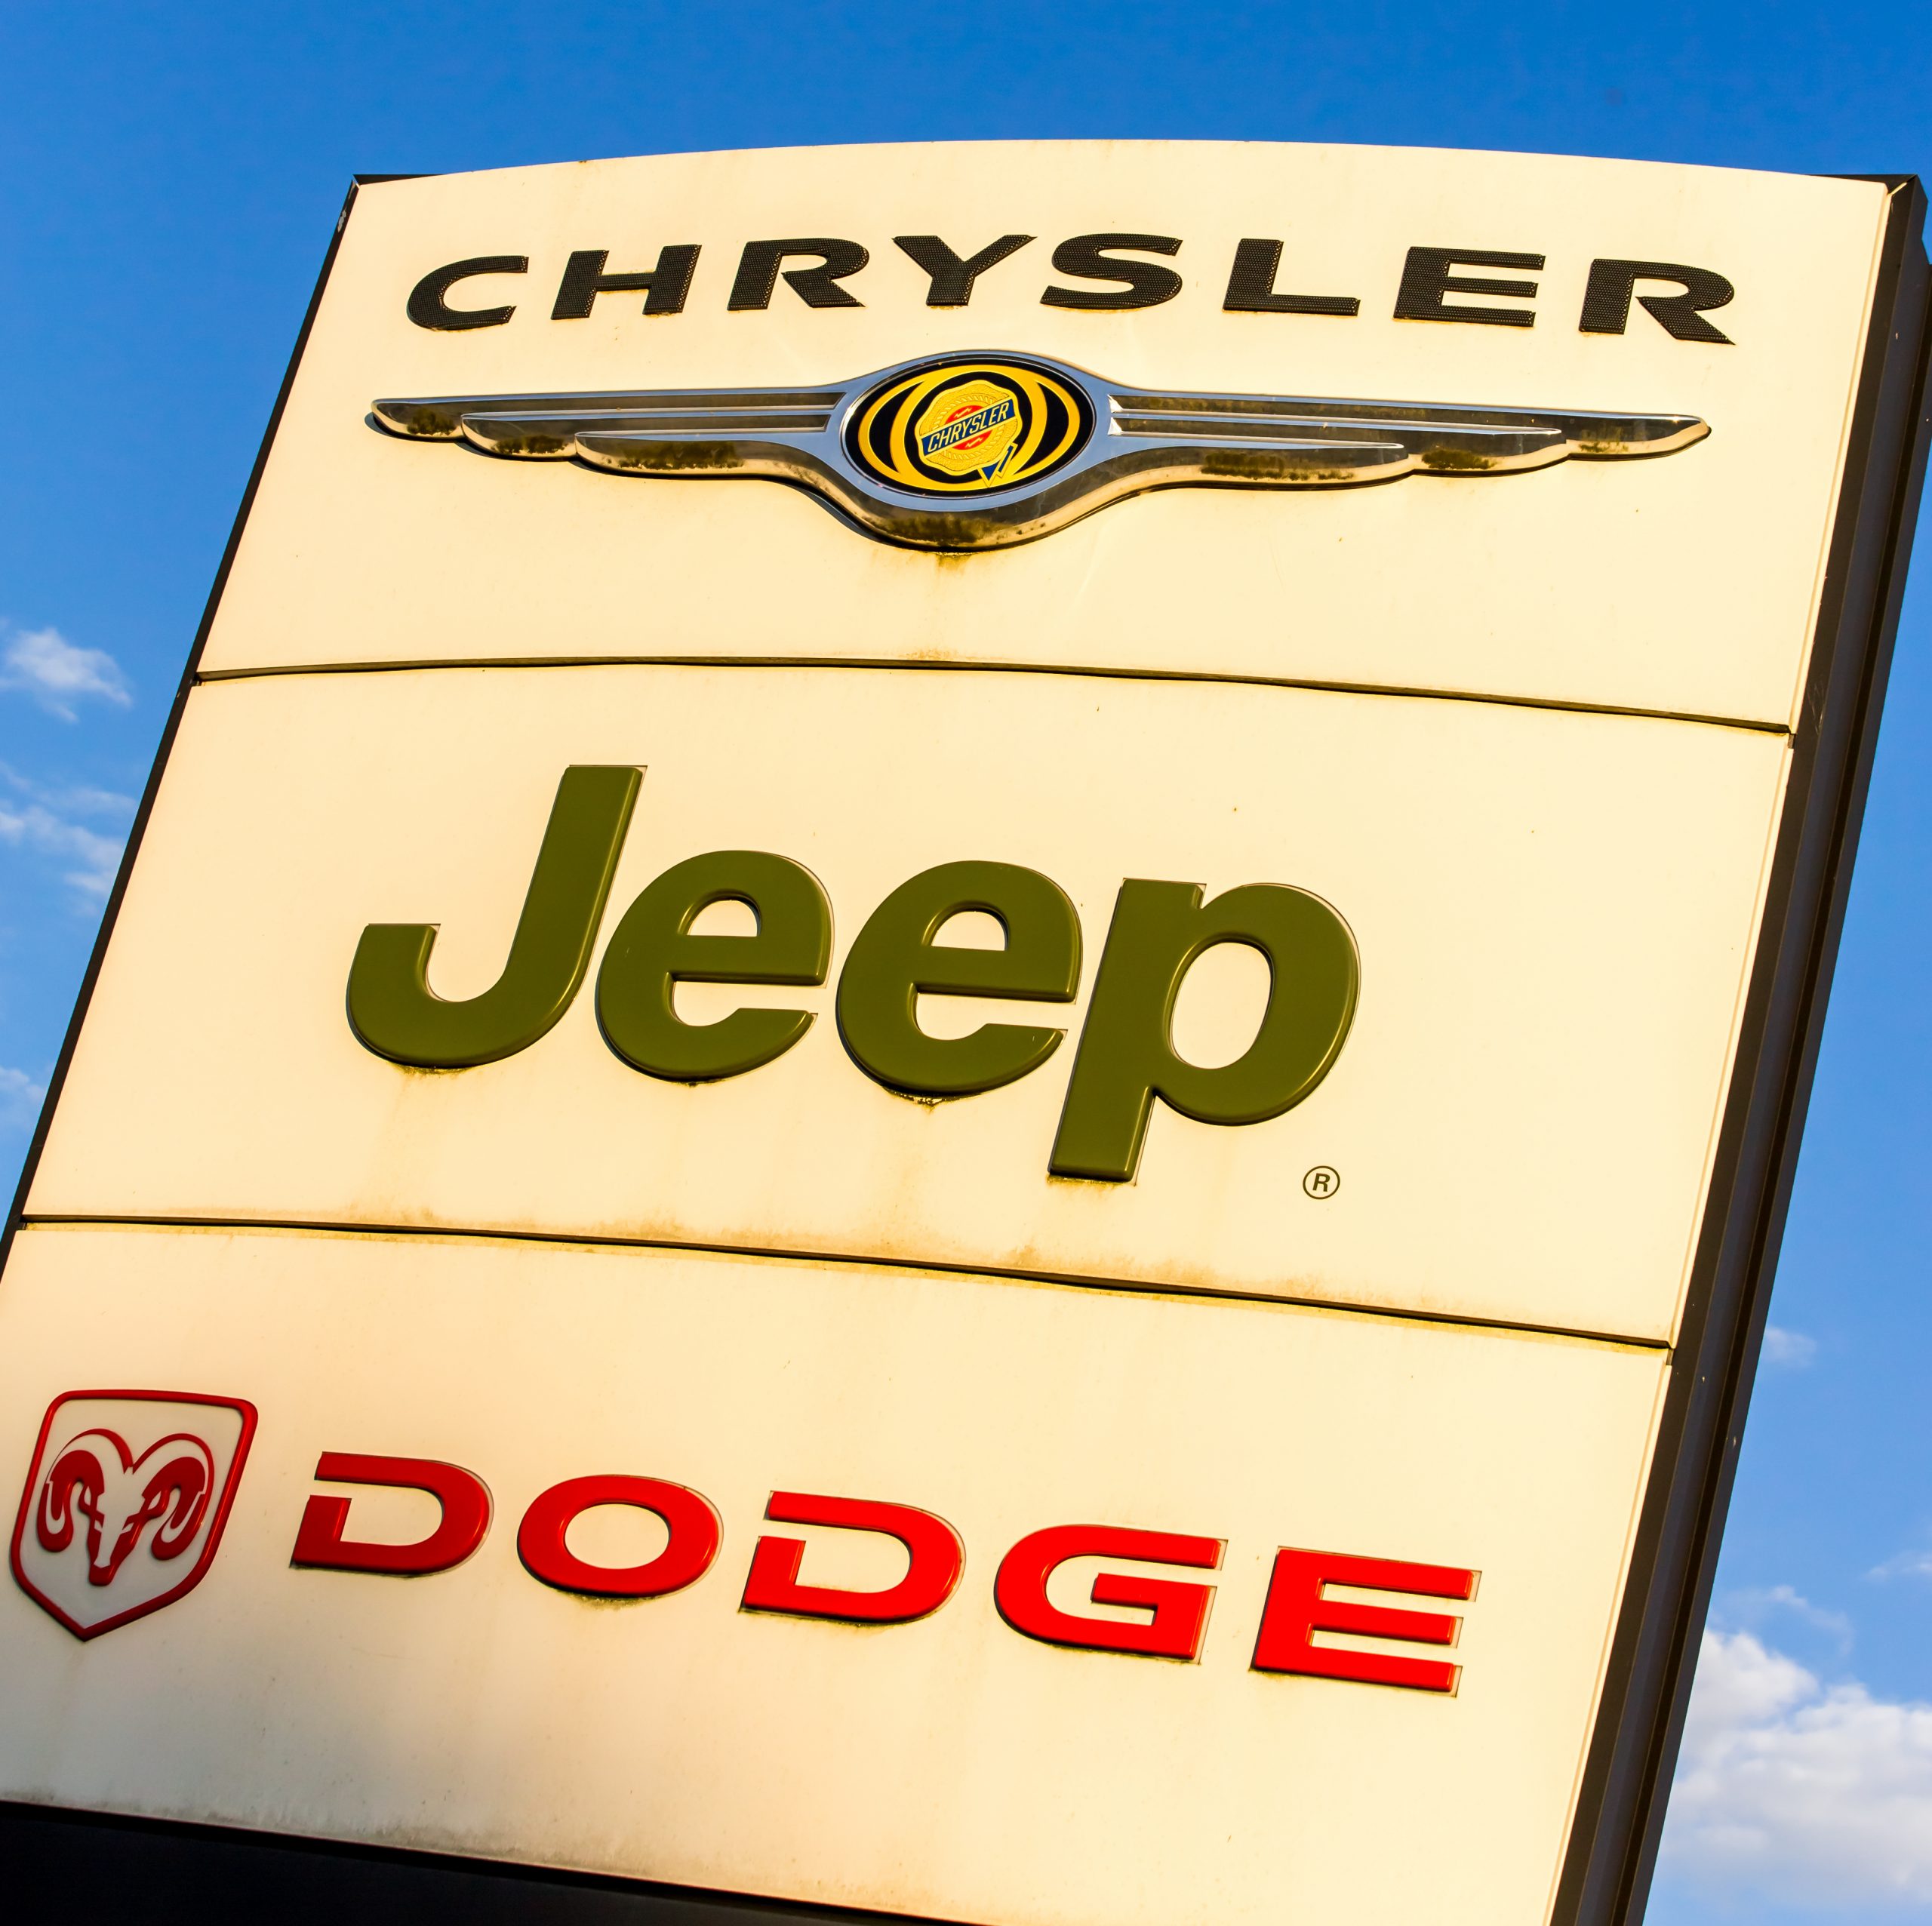 A lawsuit claims Dodge and Chrysler vehicles have defective door latching systems